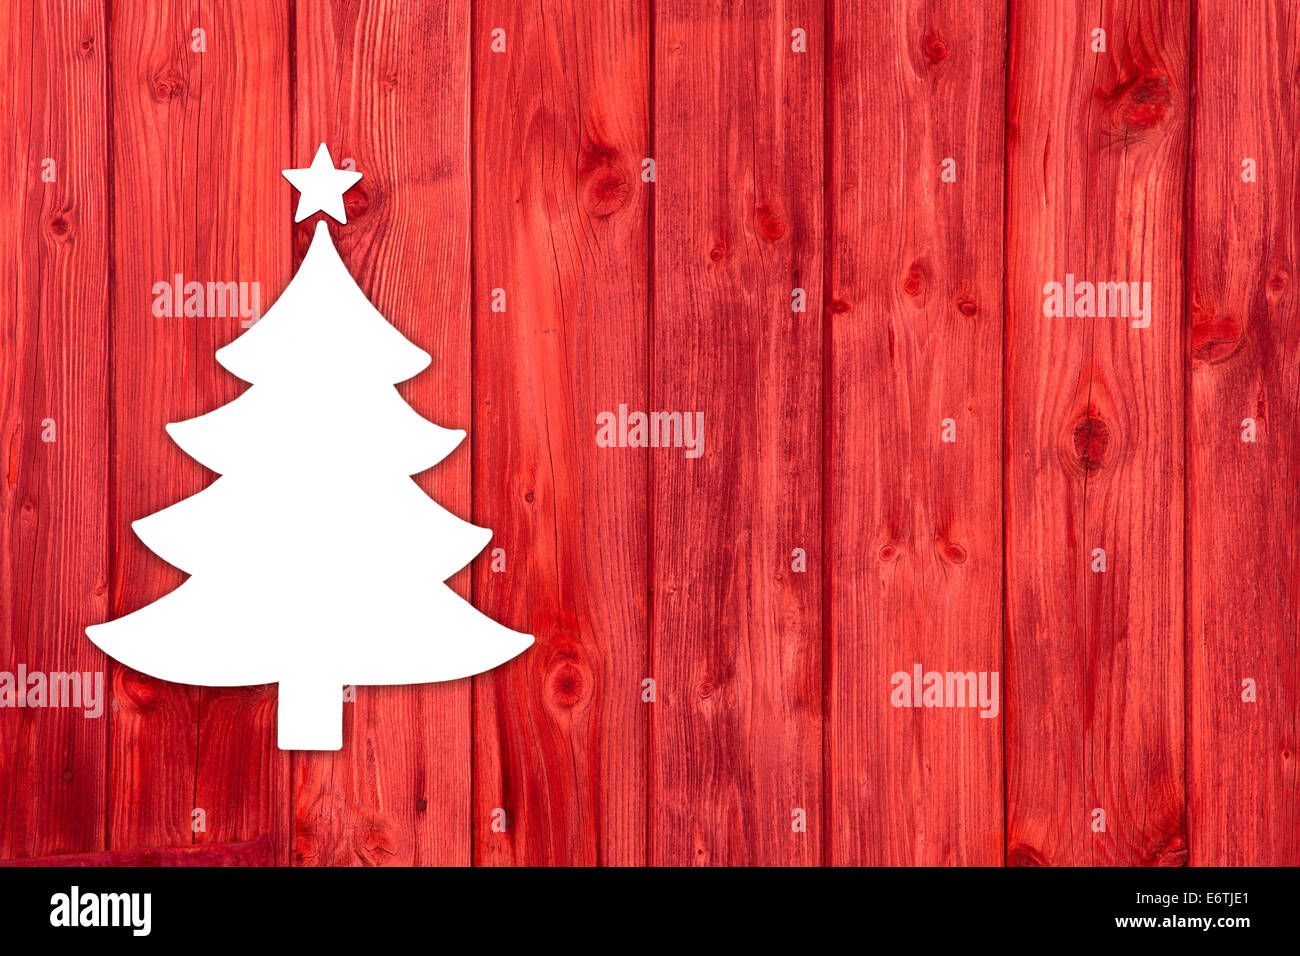 Red wooden christmas background with a white tree. Idea for a xmas card. Stock Photo